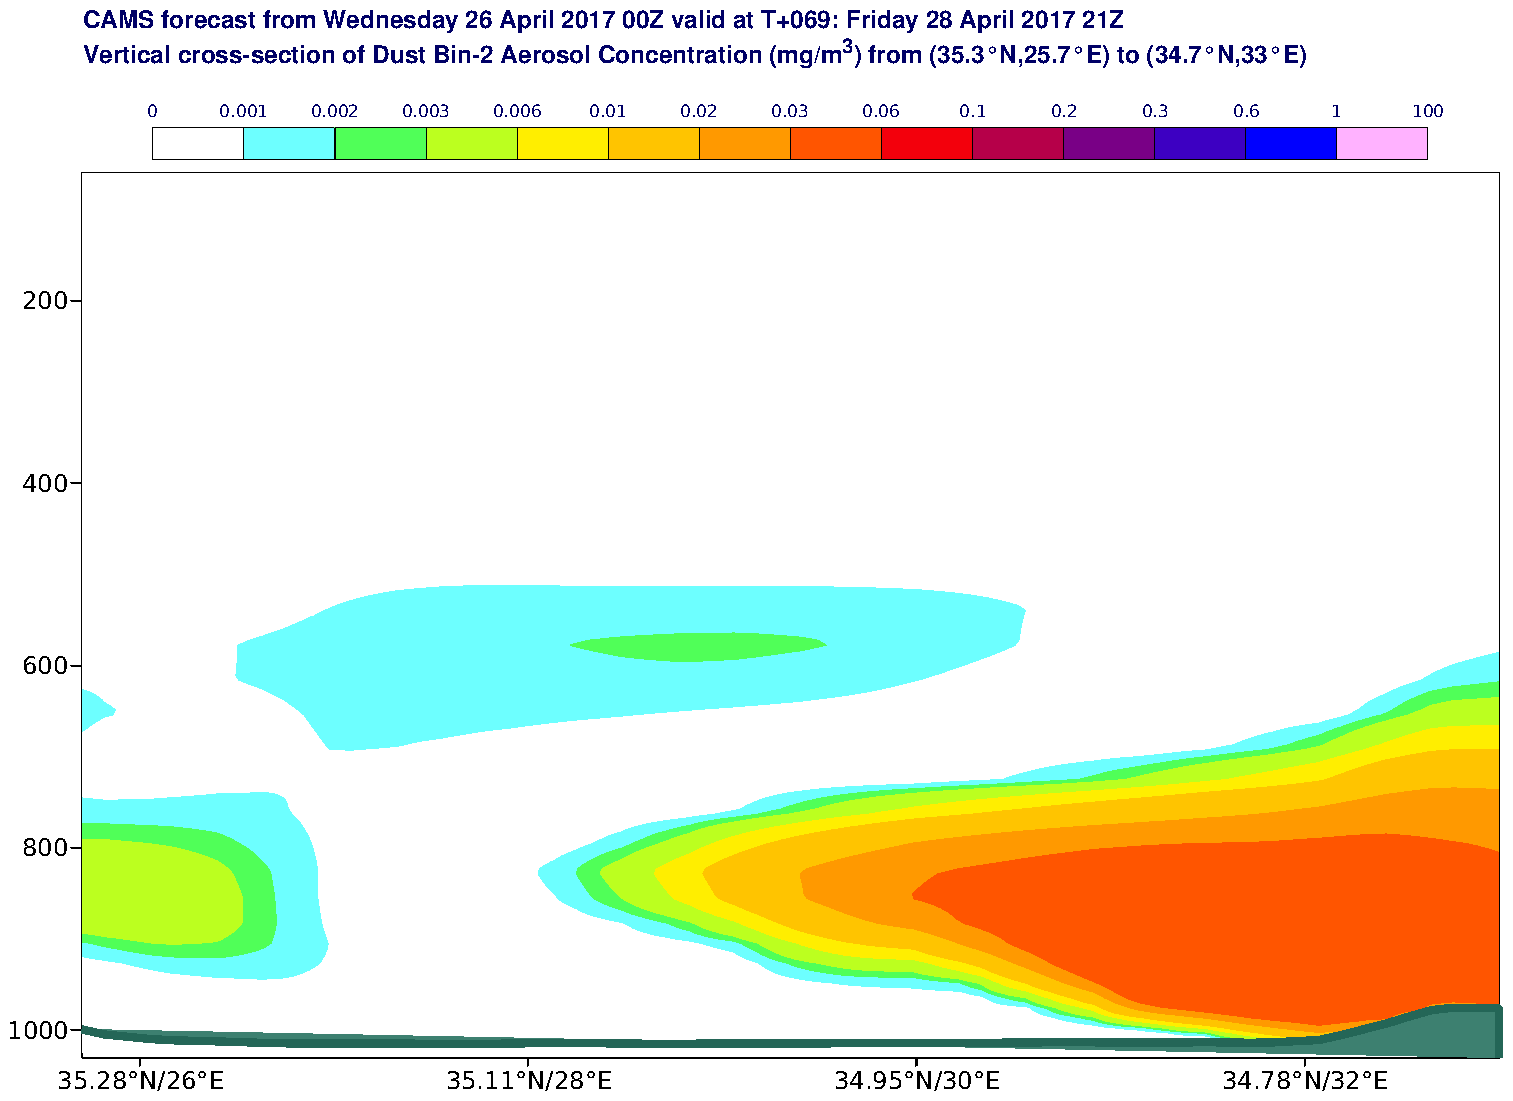 Vertical cross-section of Dust Bin-2 Aerosol Concentration (mg/m3) valid at T69 - 2017-04-28 21:00